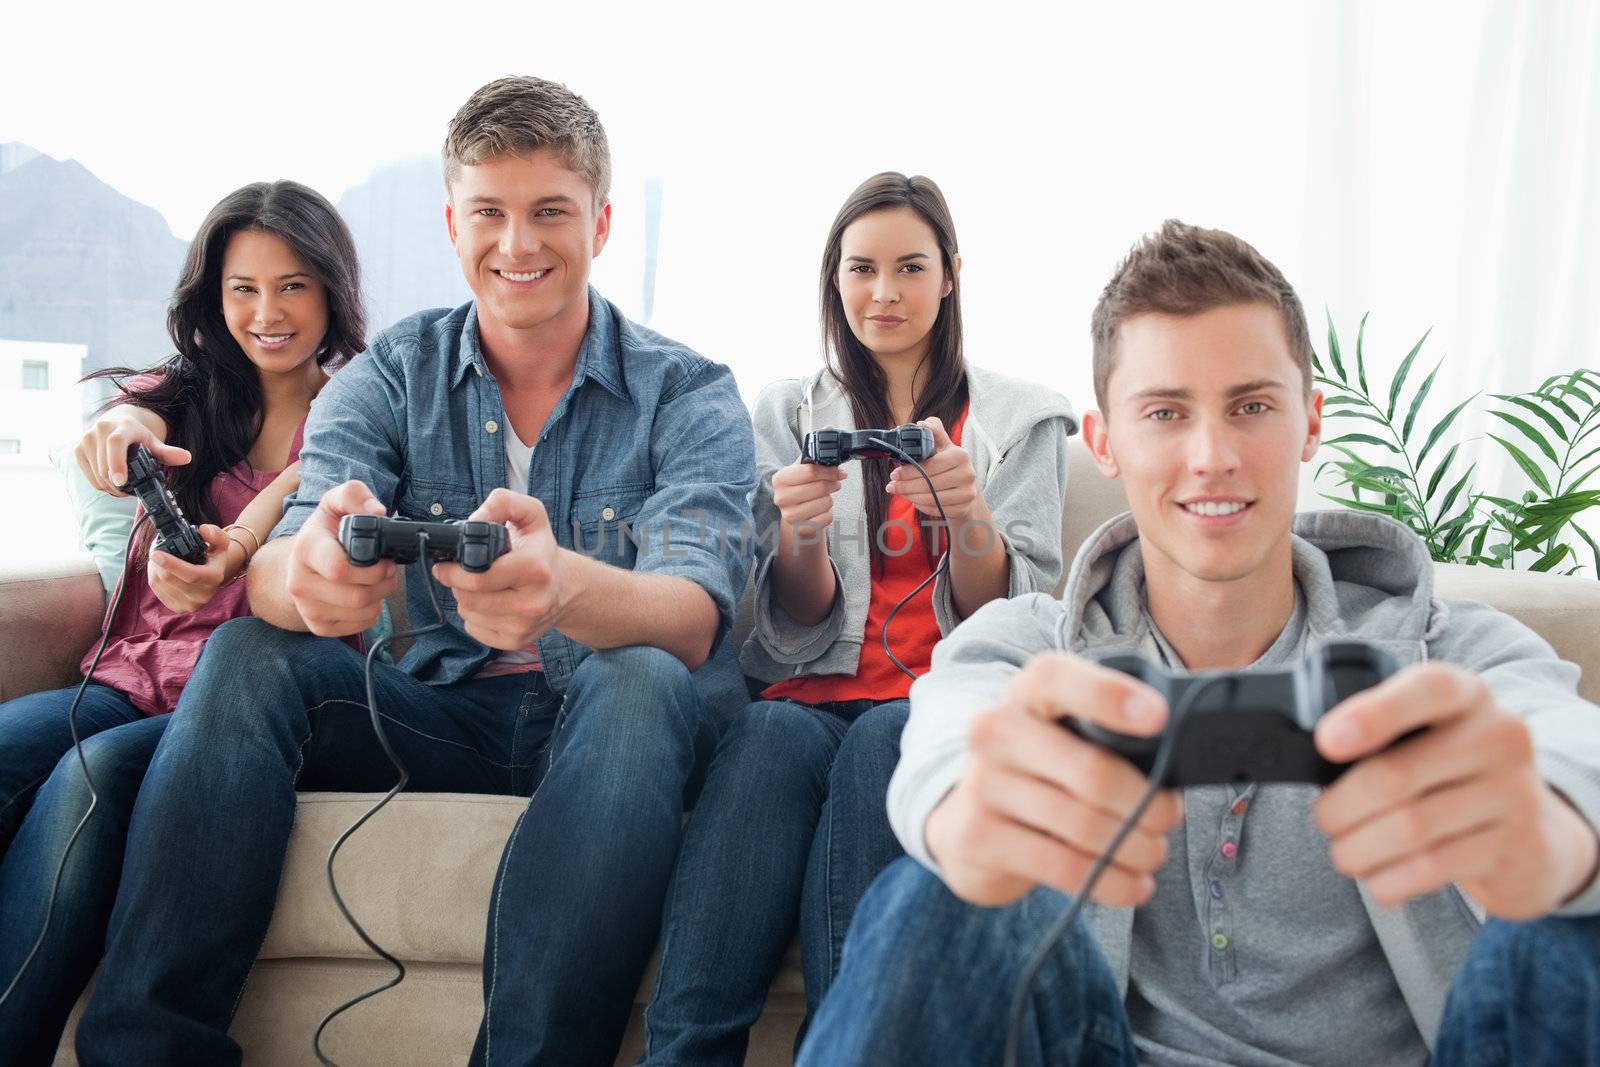 A smiling group of friends playing together on a console while looking into the camera